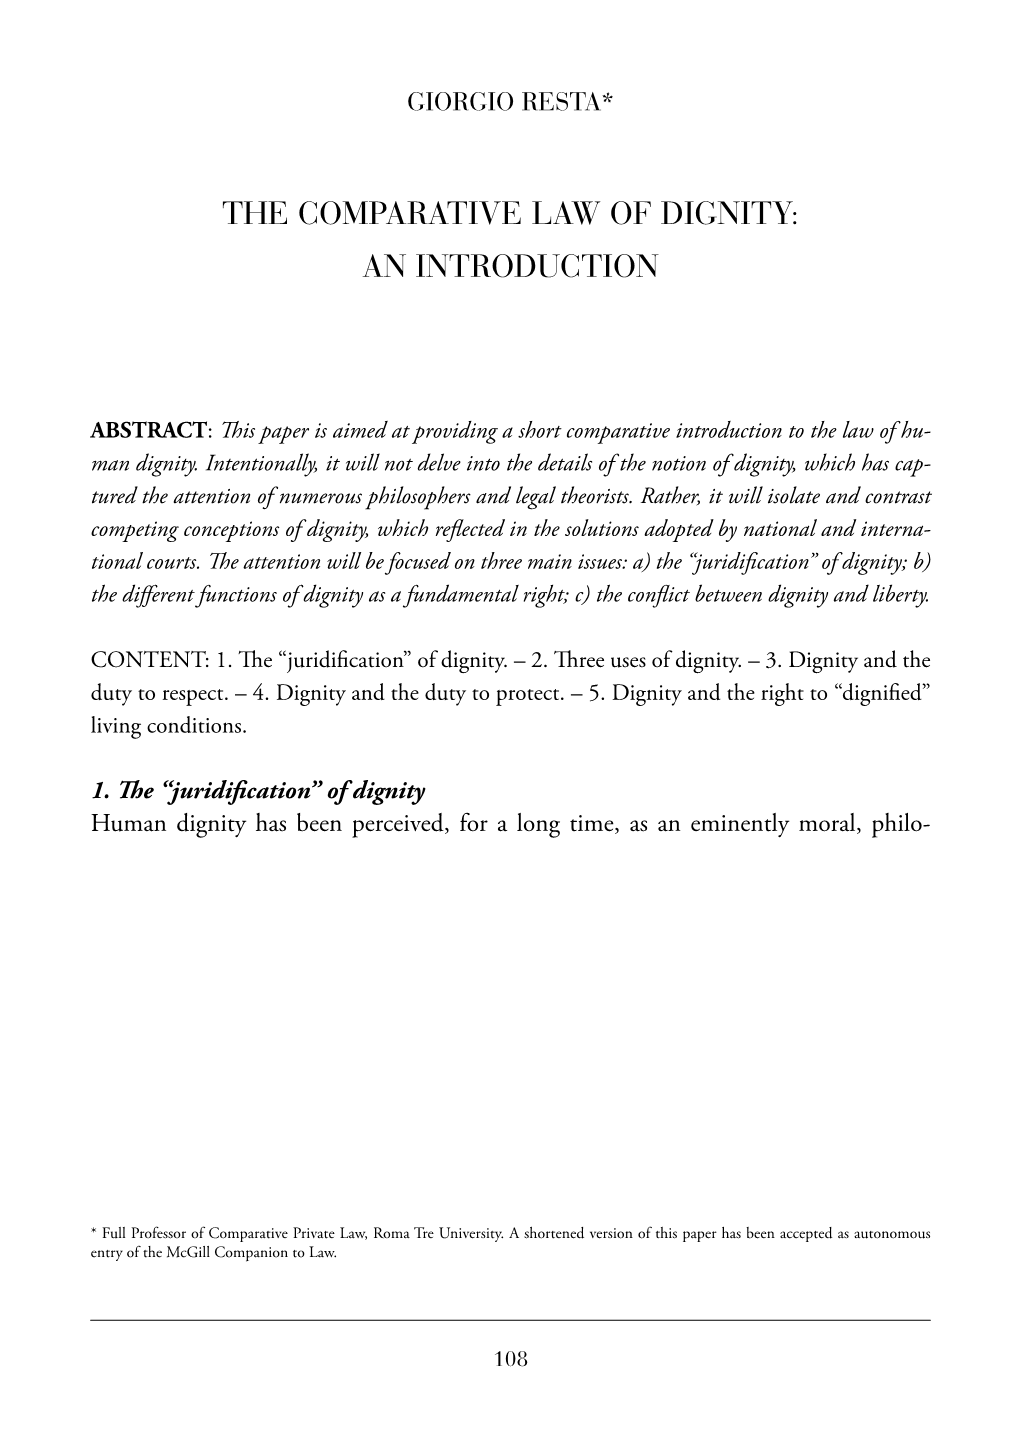 The Comparative Law of Dignity: an Introduction